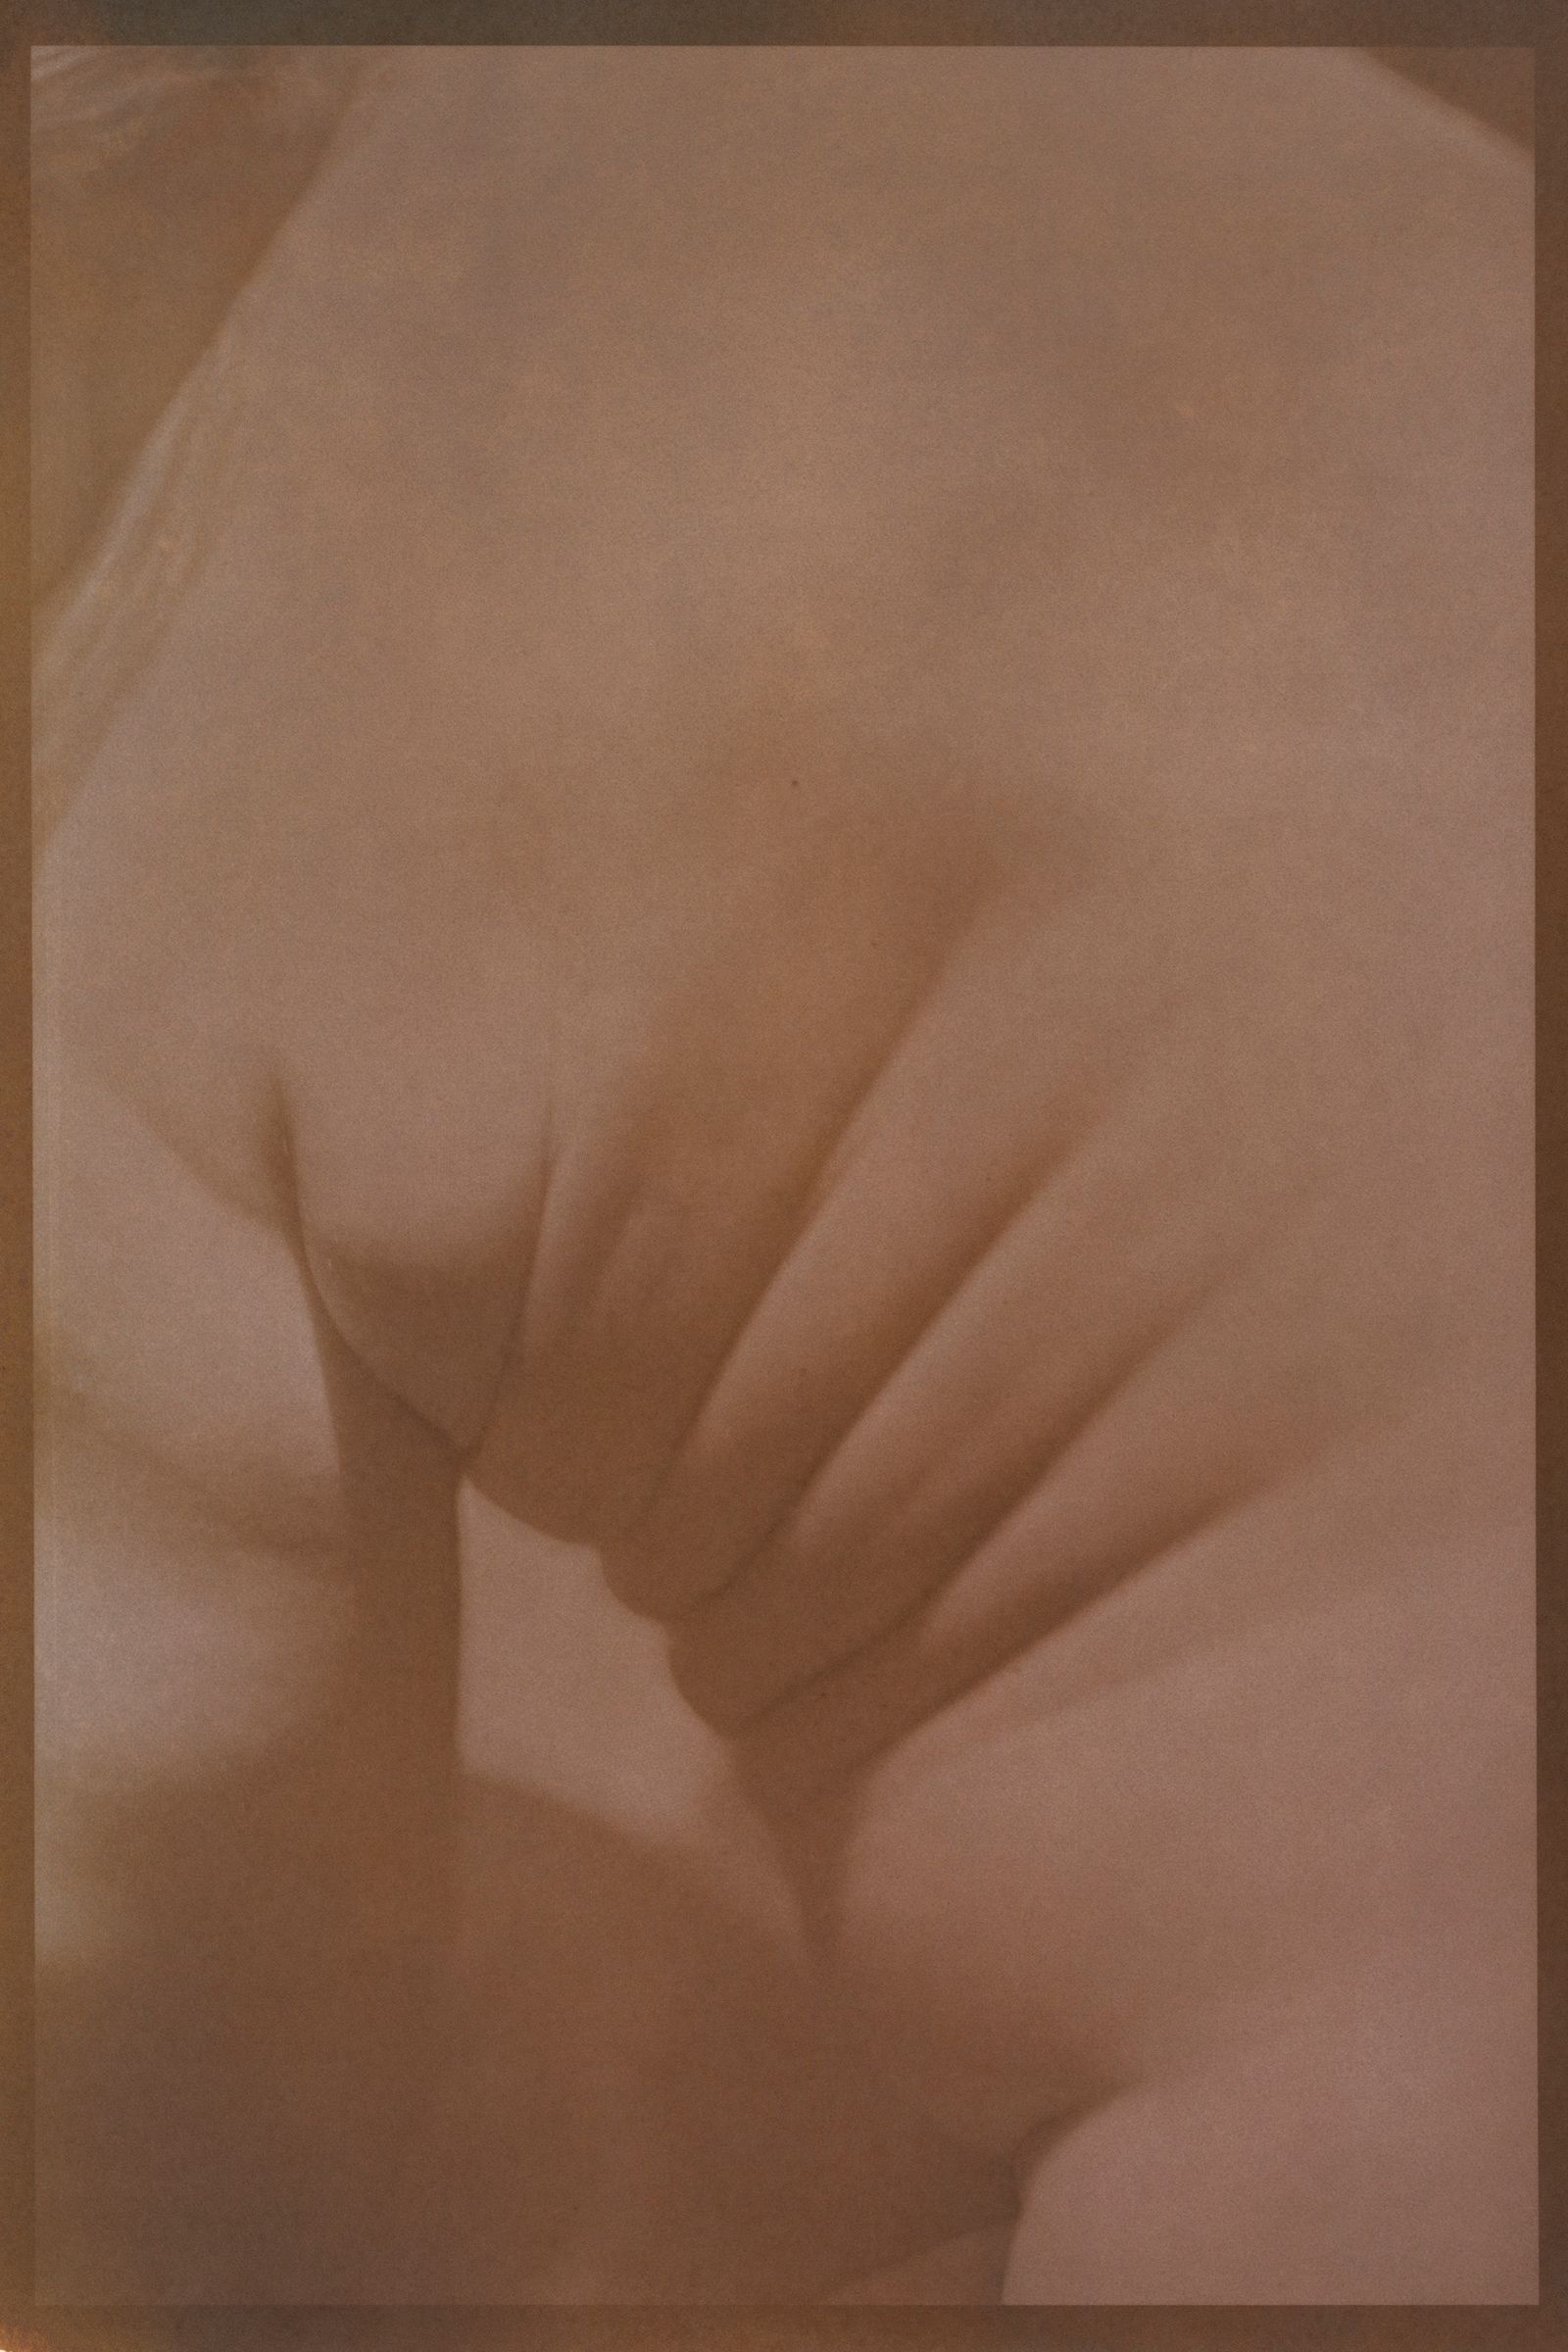 © Eleanor Oakes - Philosopher (1), 2022. 9x13.5" Salted Paper Print made with Breastmilk.